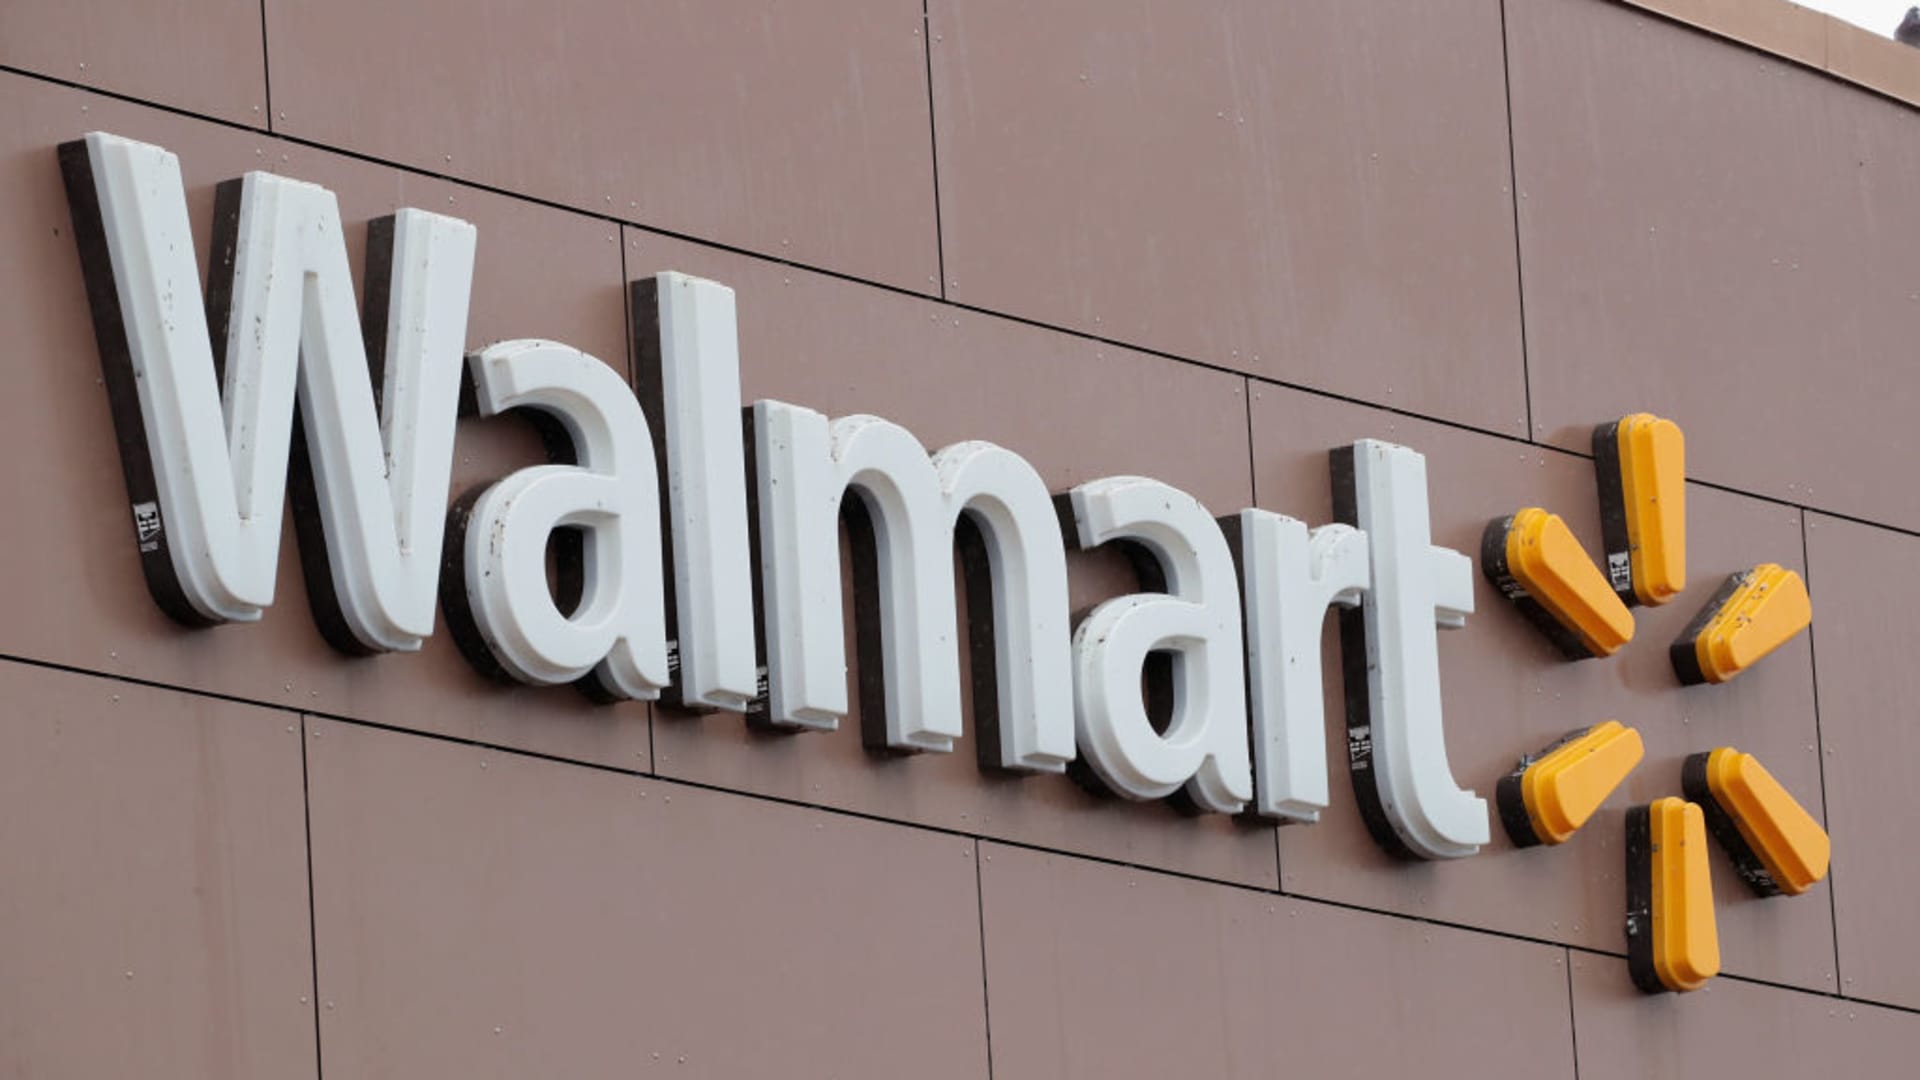 Walmart seeks new trial in wrongful termination of longtime employee with Down syndrome